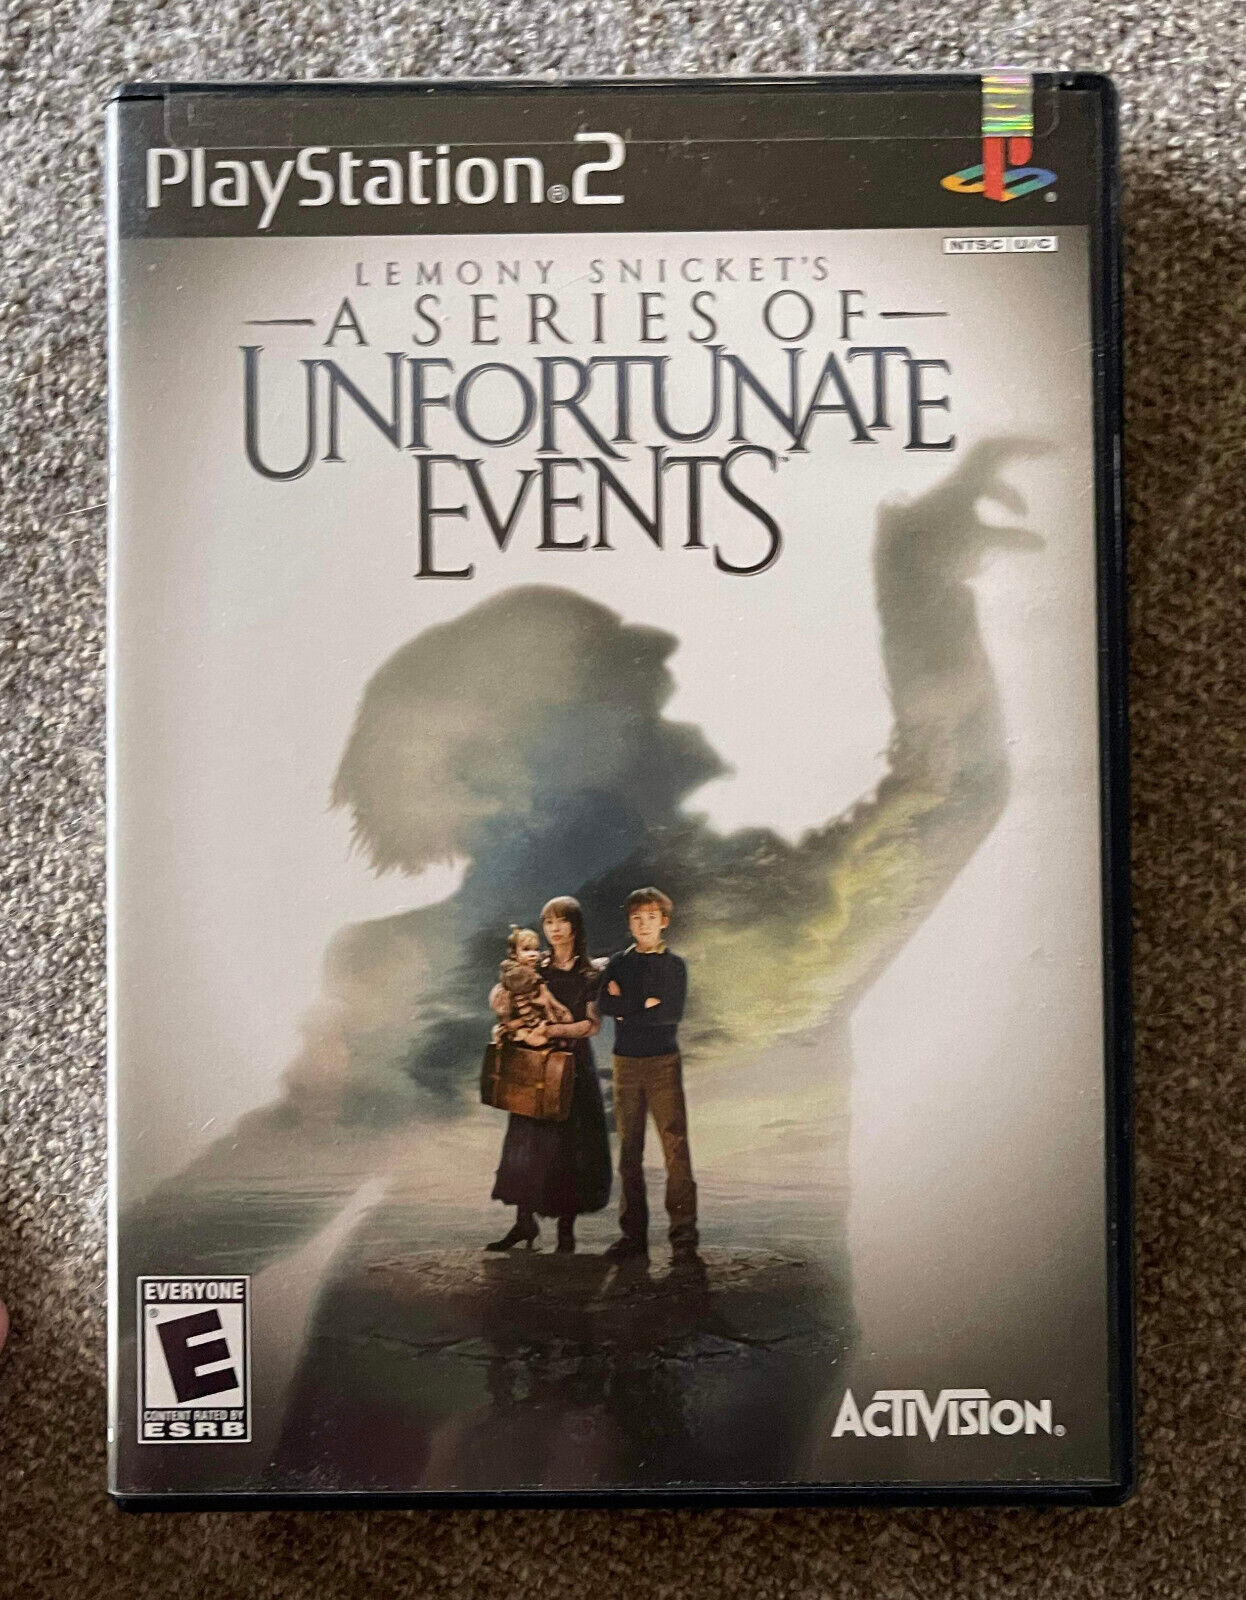 Lemony Snickets A Series of Unfortunate Events (Sony PlayStation 2, 2004) PS2